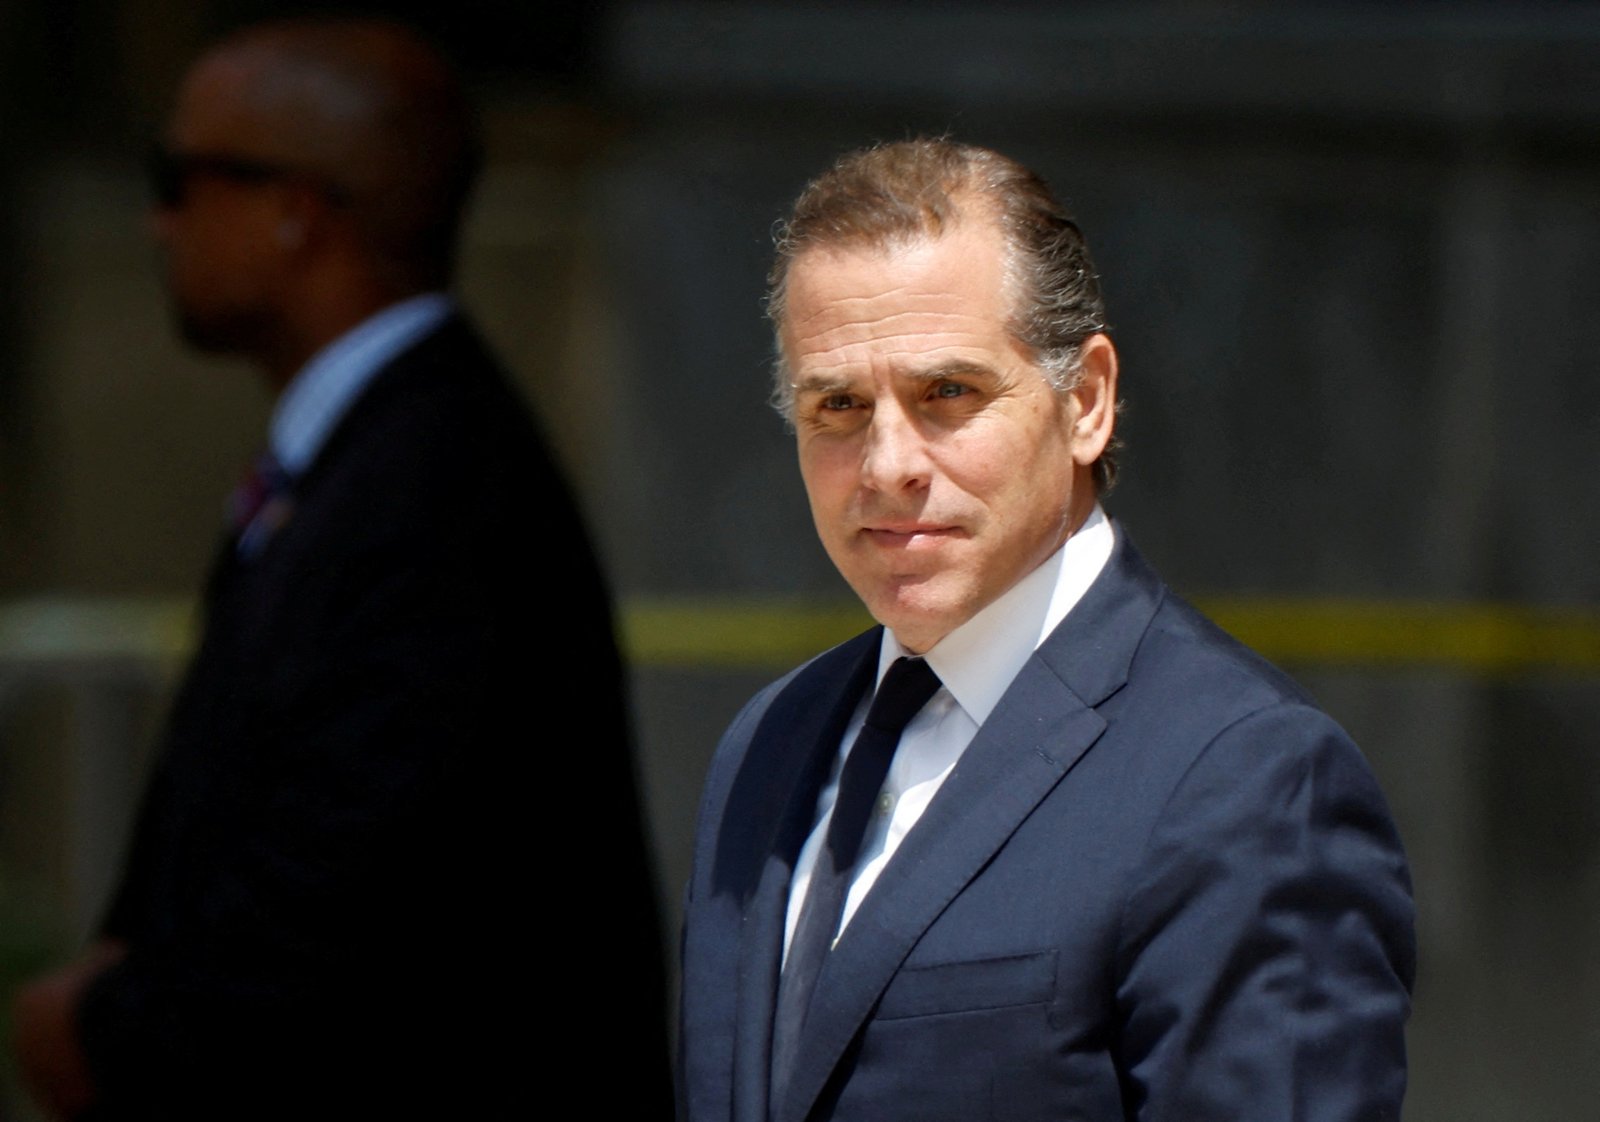 hunter-biden-could-face-trial,-newly-named-us-special-counsel-says